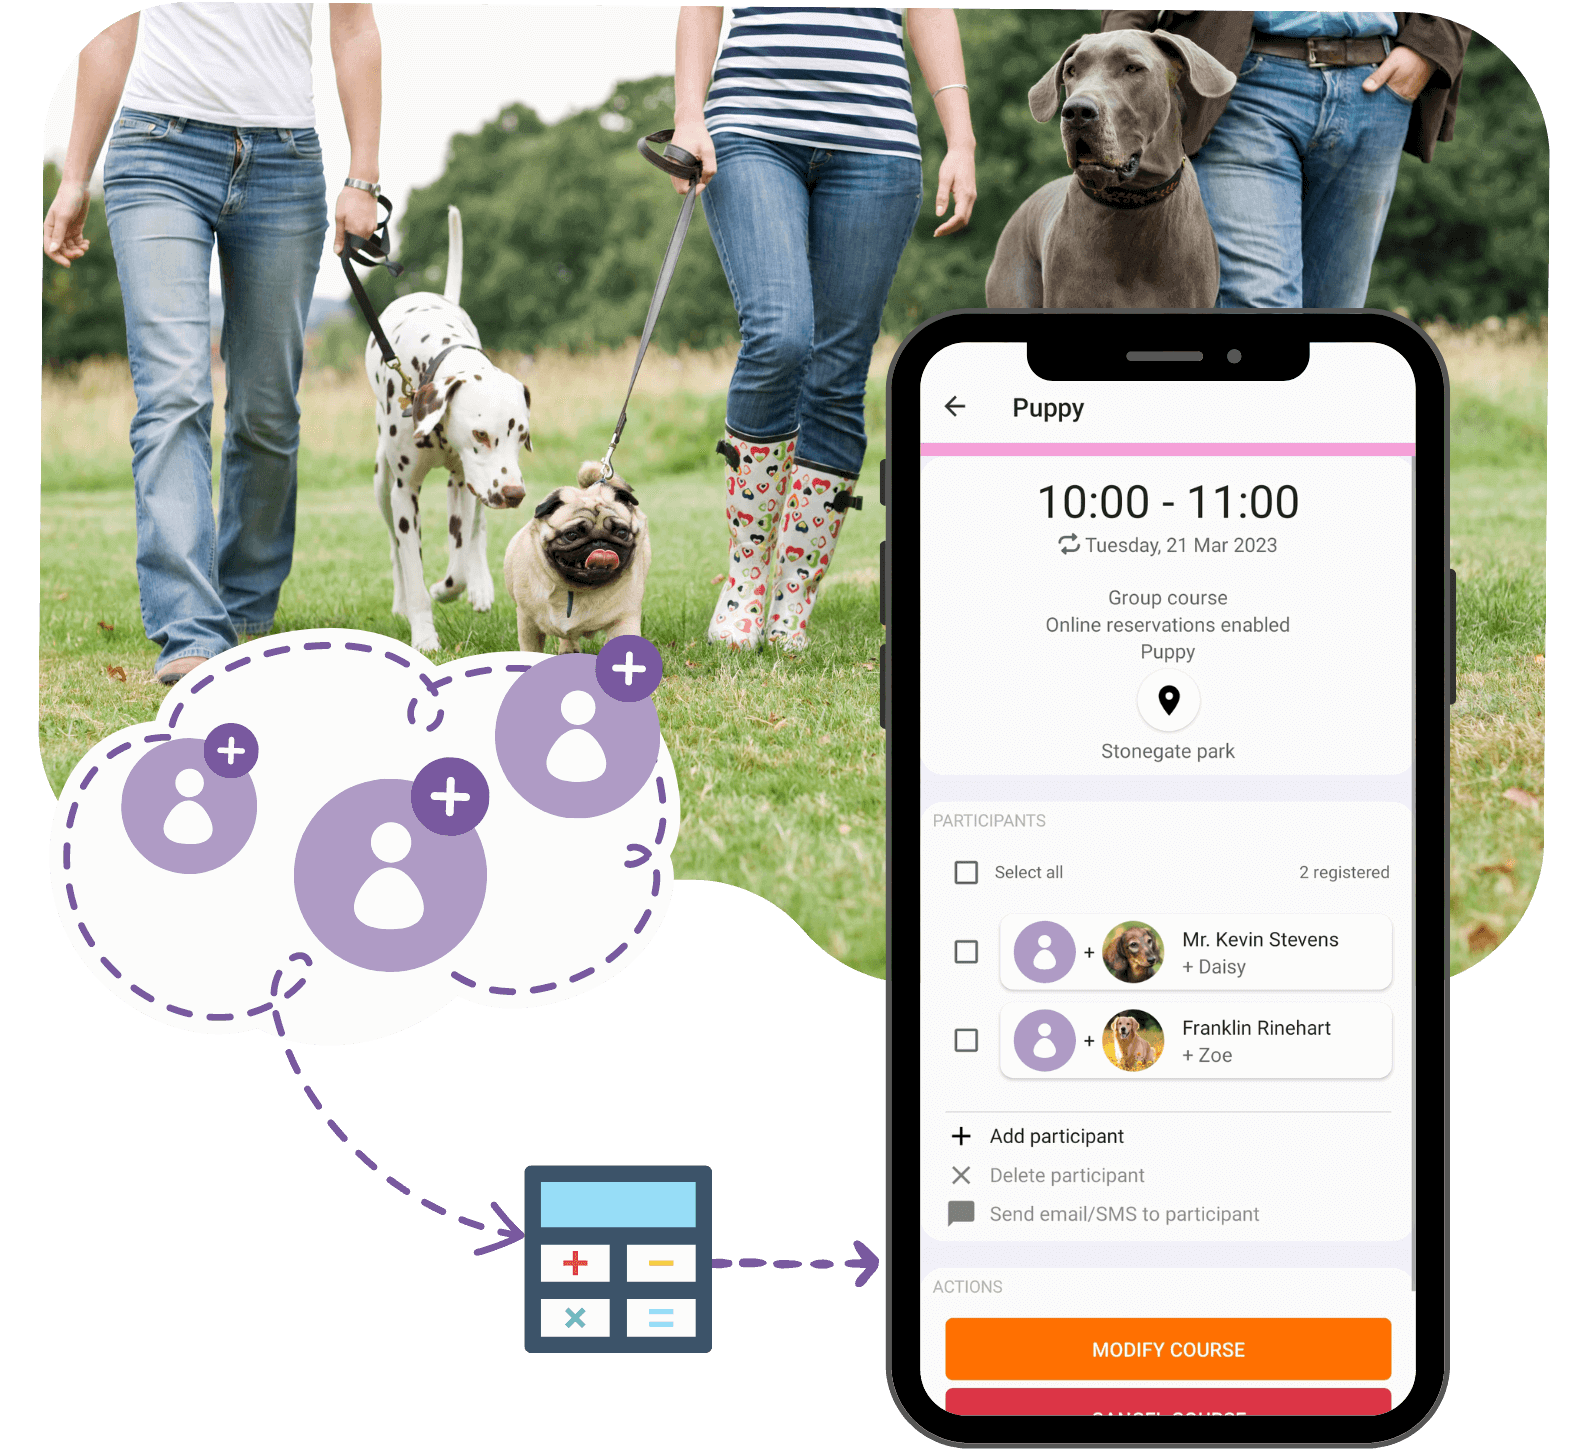 Illustration of three dog handlers registering for a dog training course, calculating their balance, visible in the BaltoPro mobile application.